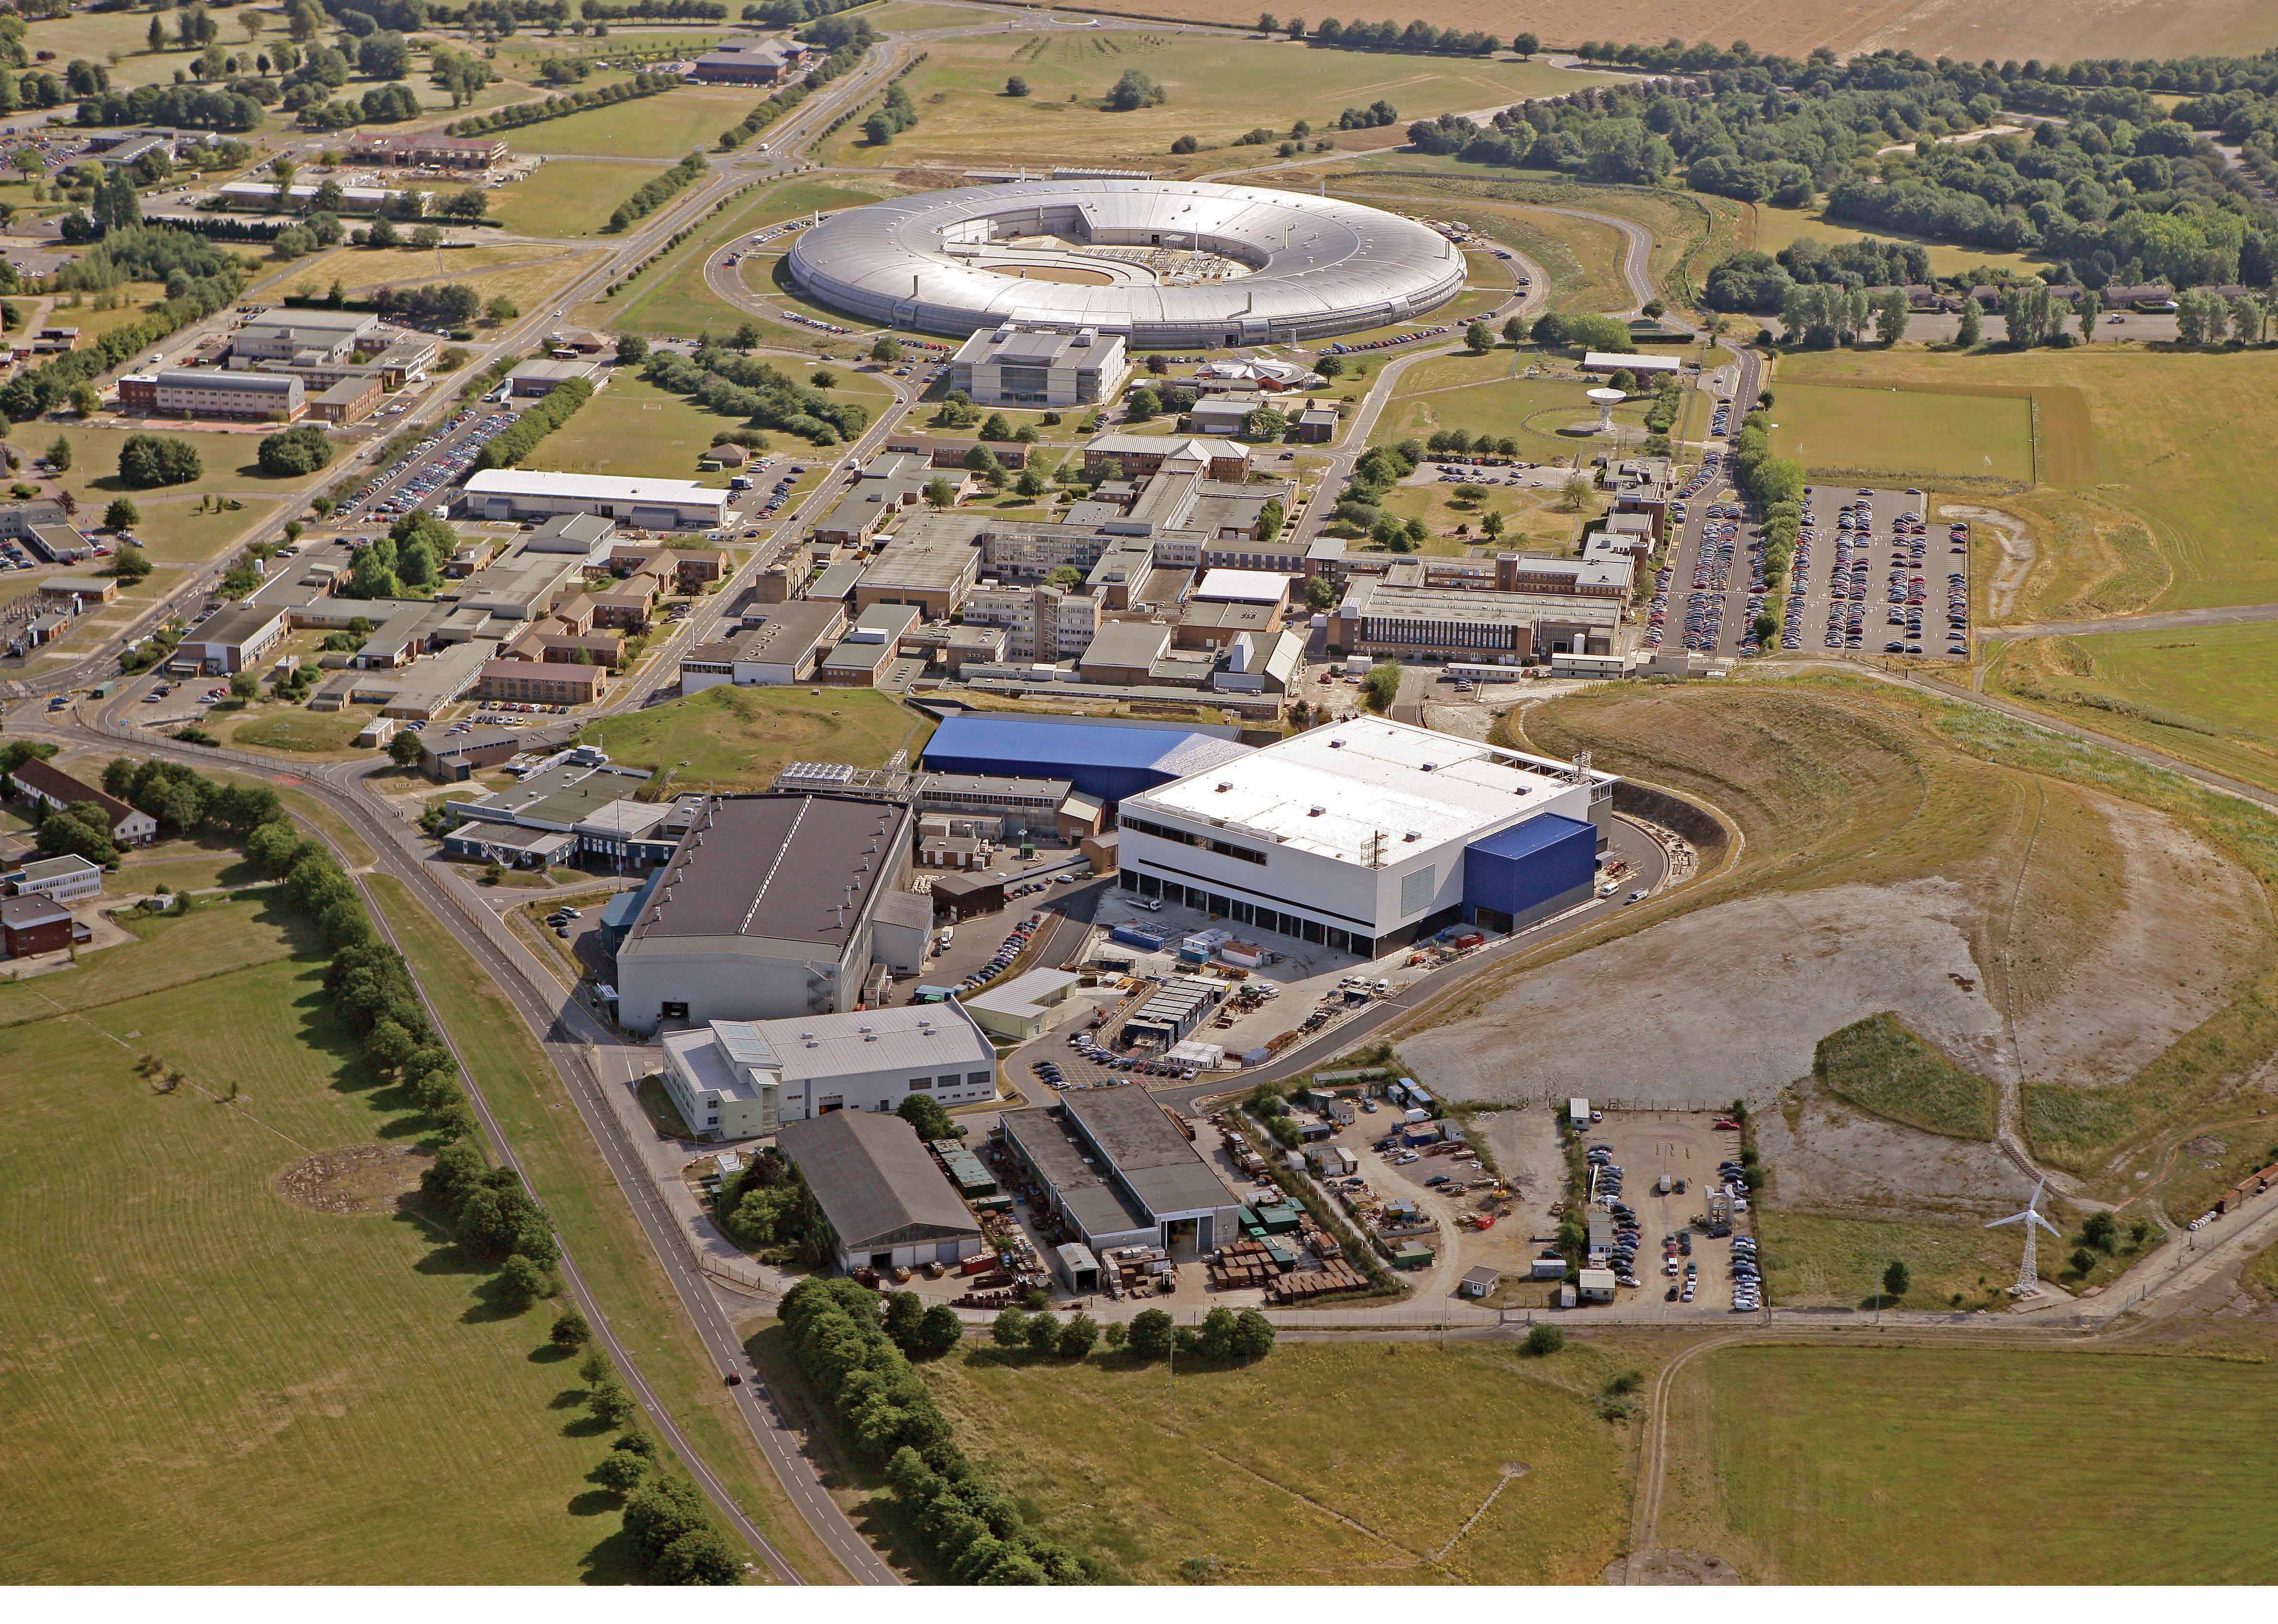 Rutherford Appleton Laboratory, home of the Diamond Light Source and ISIS Neutron Source